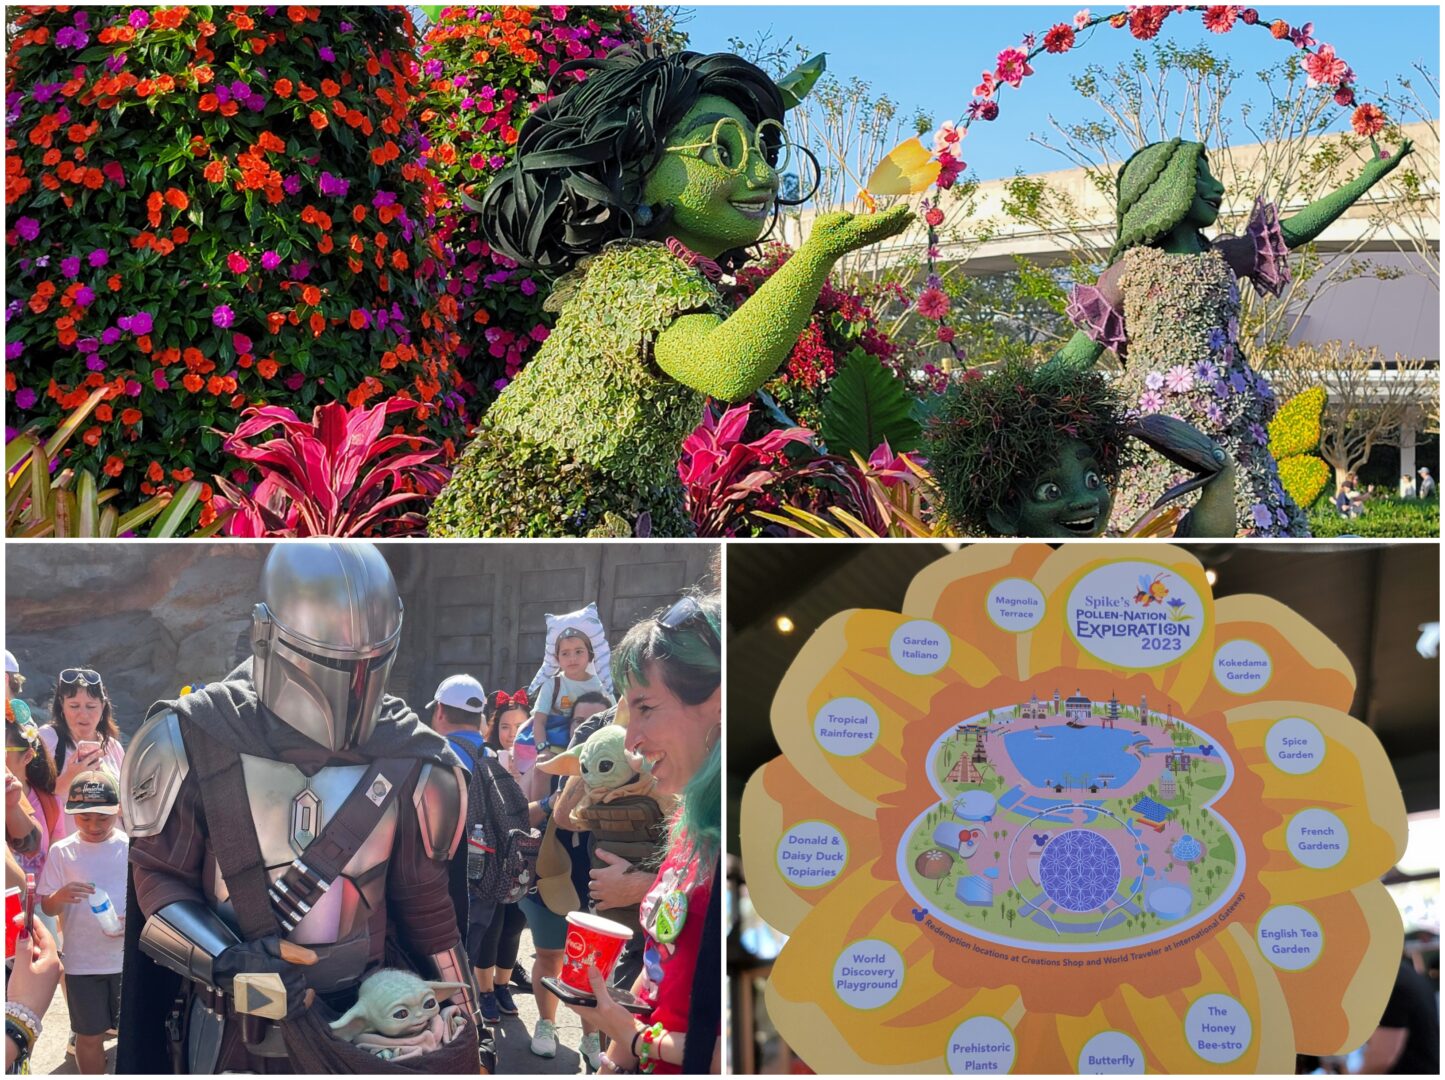 Disney News Highlights: Mando and Grogu Hollywood Studios Suprise Visit, Orange Bird Inception Sipper, More Inclusion at Disney World on “it’s a small world” Attraction